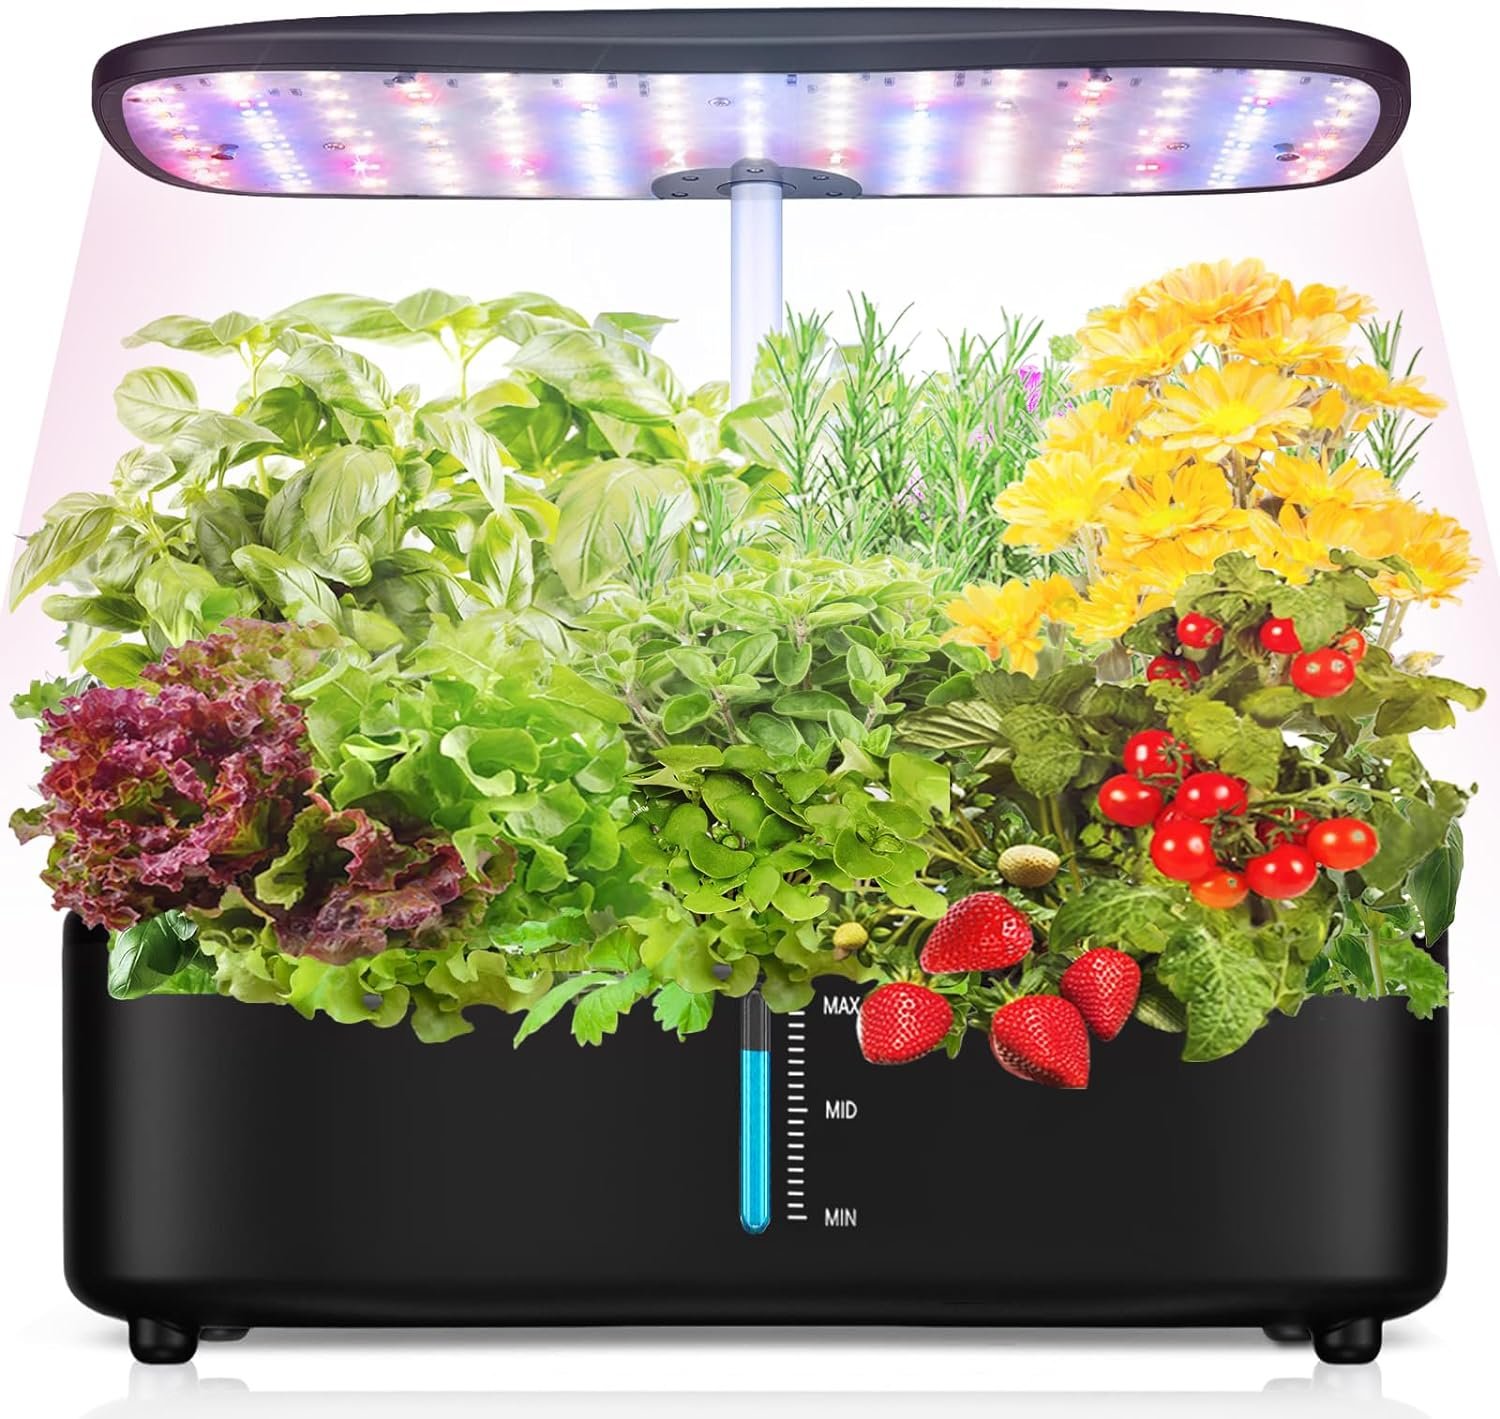 12 pod hydroponic garden system review